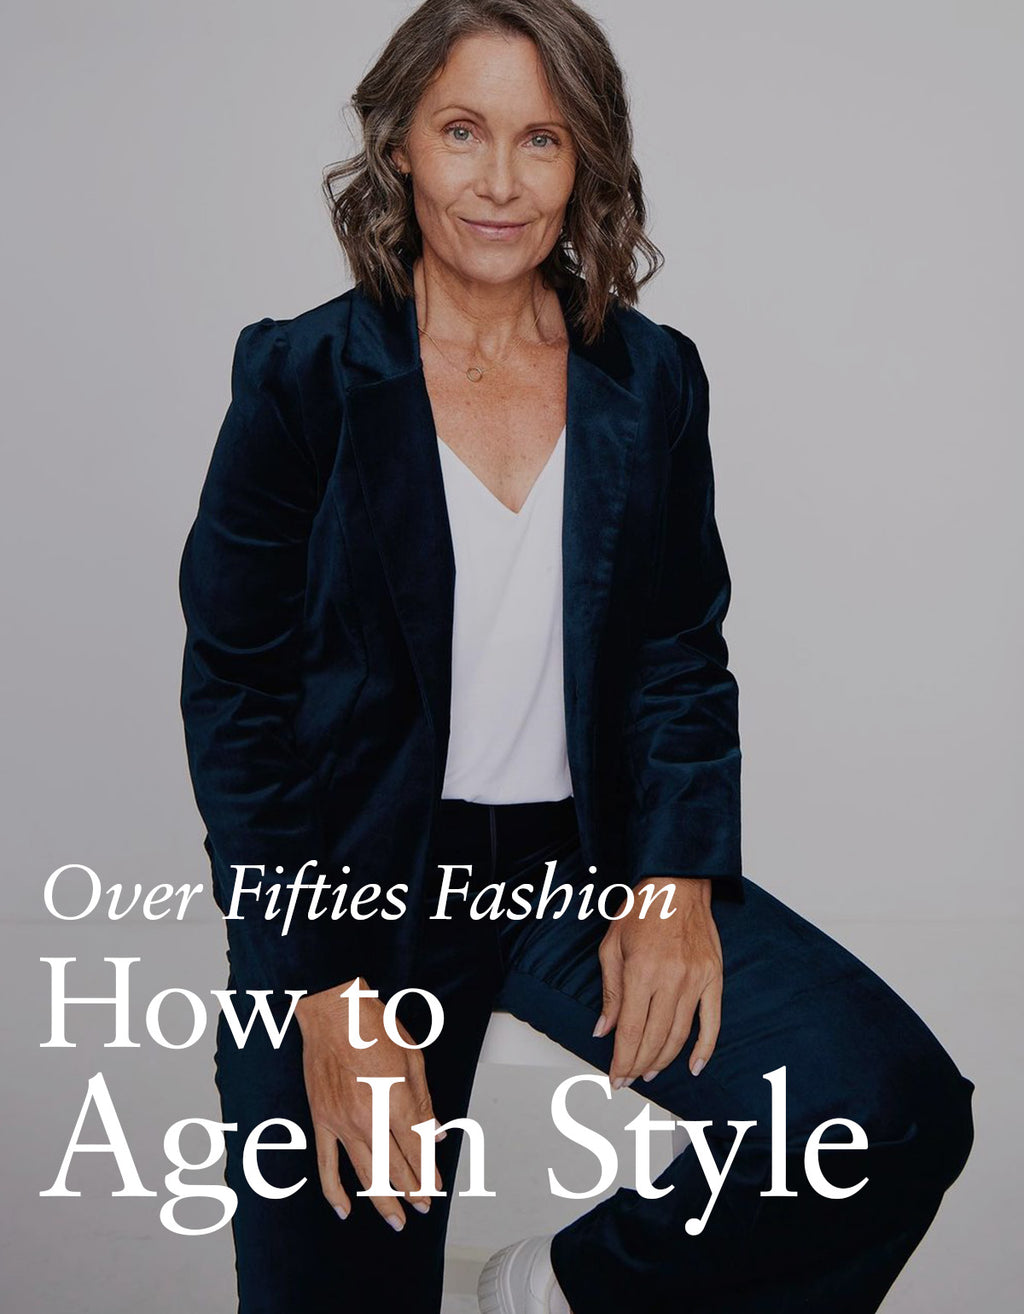 12 Style Essentials For Women Over 50 - A Well Styled Life®